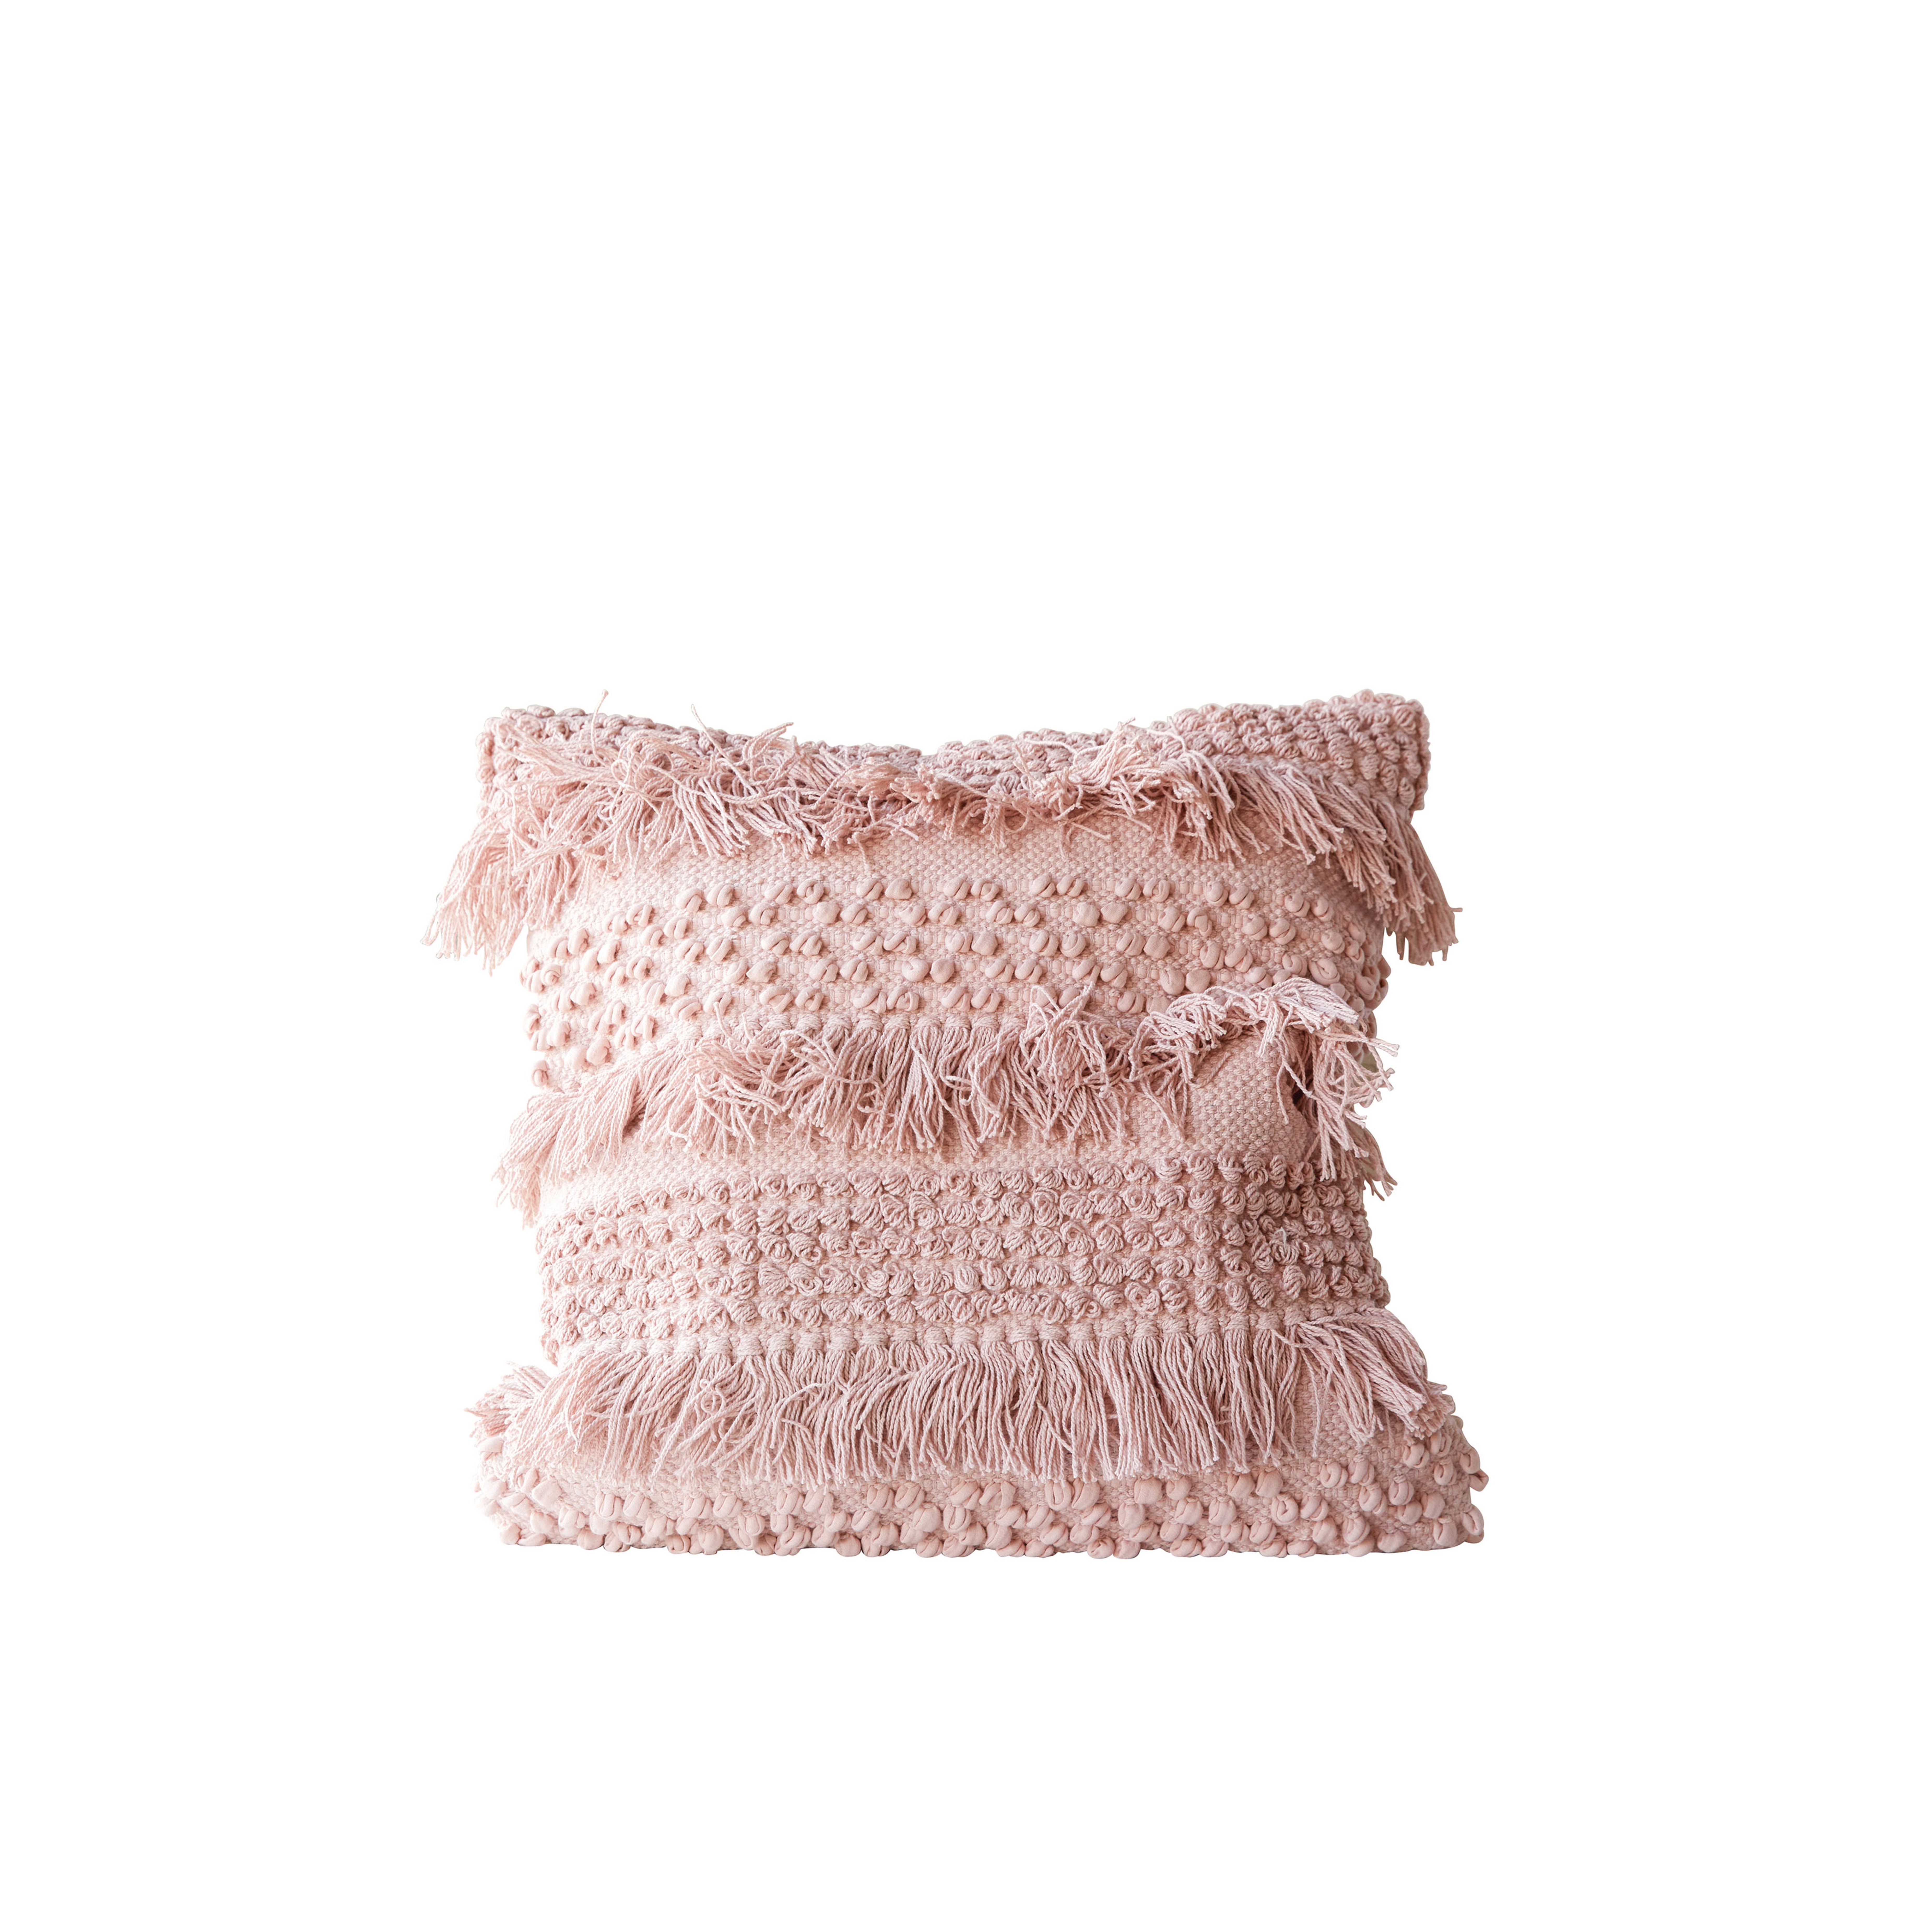 Square Pink Pillow with Fringe and Multiple Designs with Varied Textures - Nomad Home